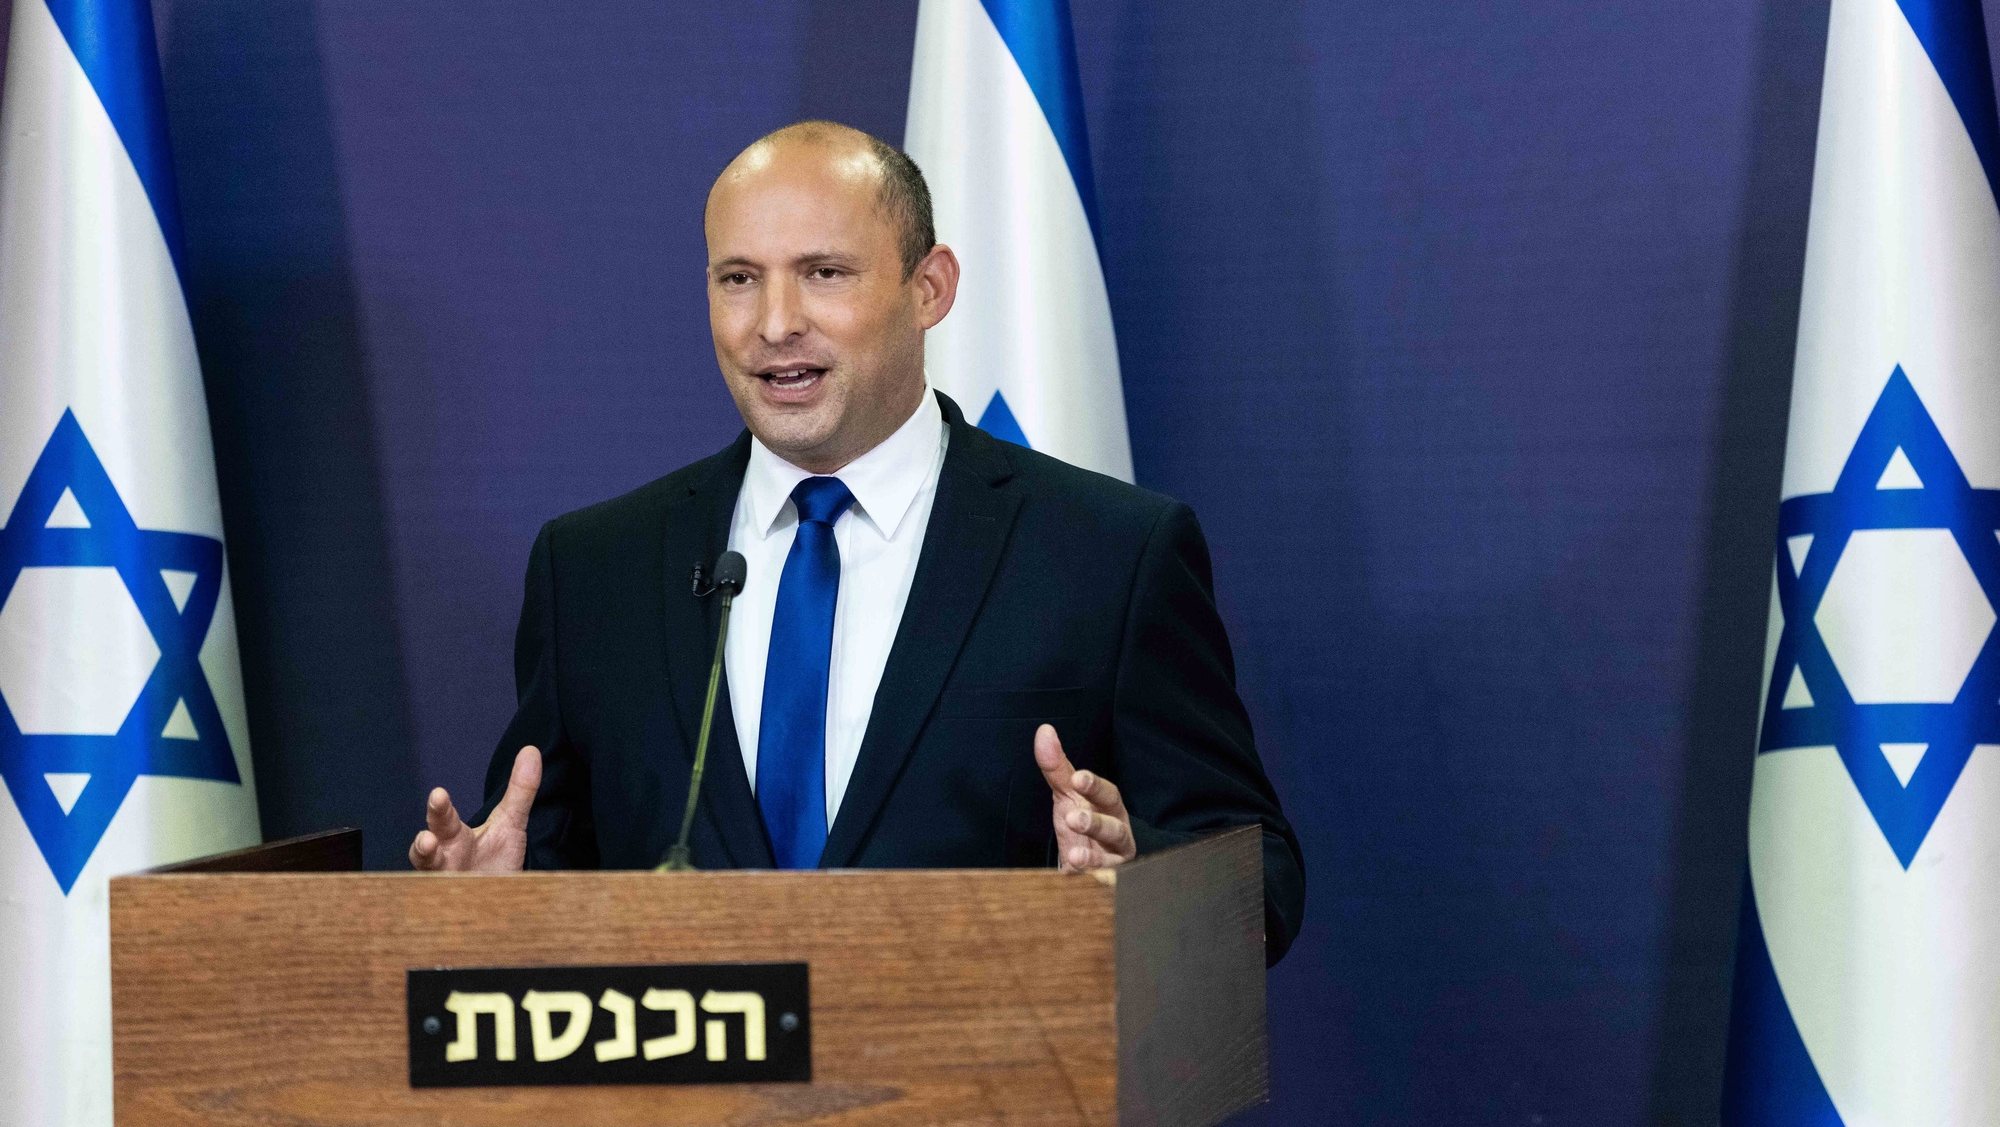 epa09237728 Leader of the Yemina party, Naftali Bennett, delivers a political statement in the Knesset (the Israeli Parliament), in Jerusalem, Israel, 30 May 2021. Naftali Bennett announced he will form a government with Yair Lapid to oust Prime Minister Benjamin Netanyahu.  EPA/YONATAN SINDEL / POOL